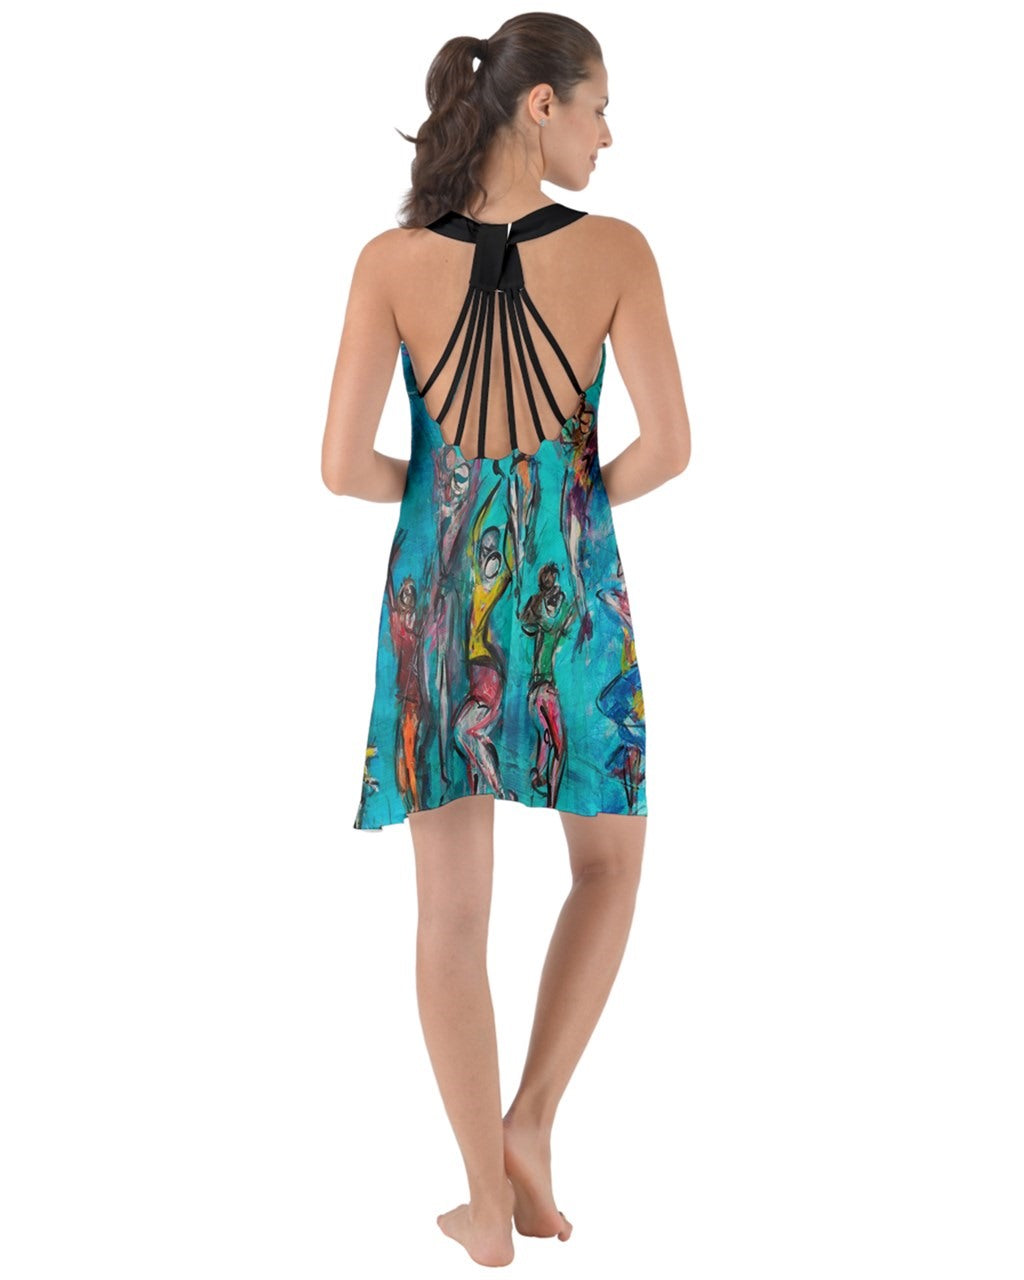 A captivating torquoise swirling dress featuring criss-cross back straps, adorned with original art by Leeorah. The fabric gracefully flows, accentuating movement with its seductive design .Be the star on the dance floor .Back view 